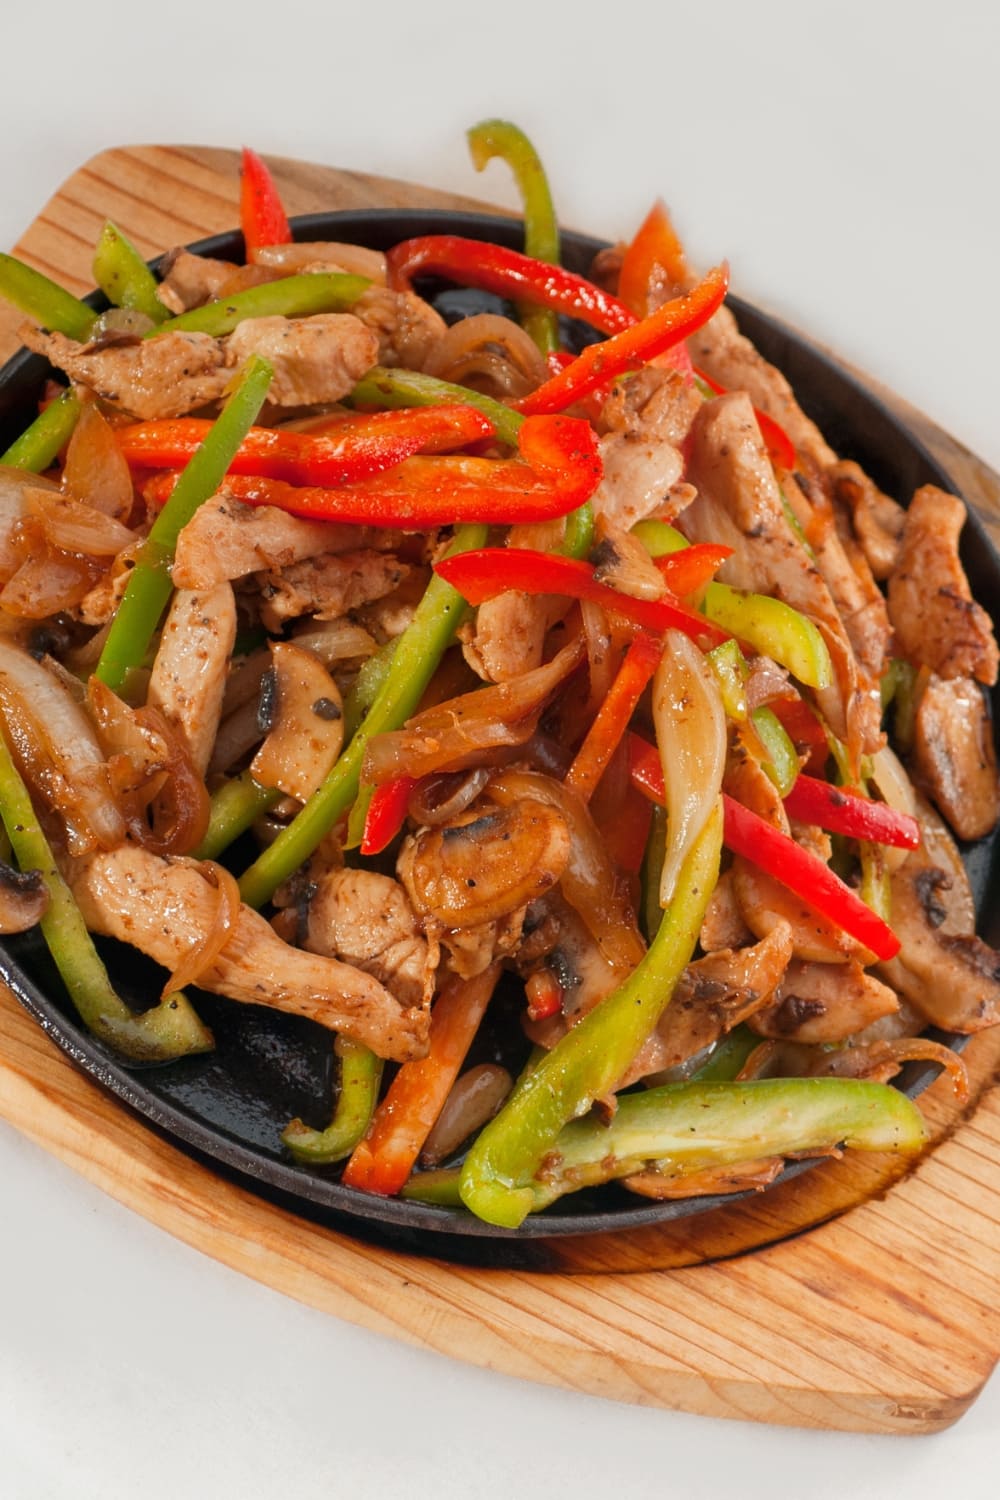 Chicken Fajitas with Green and Red Peppers, Served on a Sizzling Plate